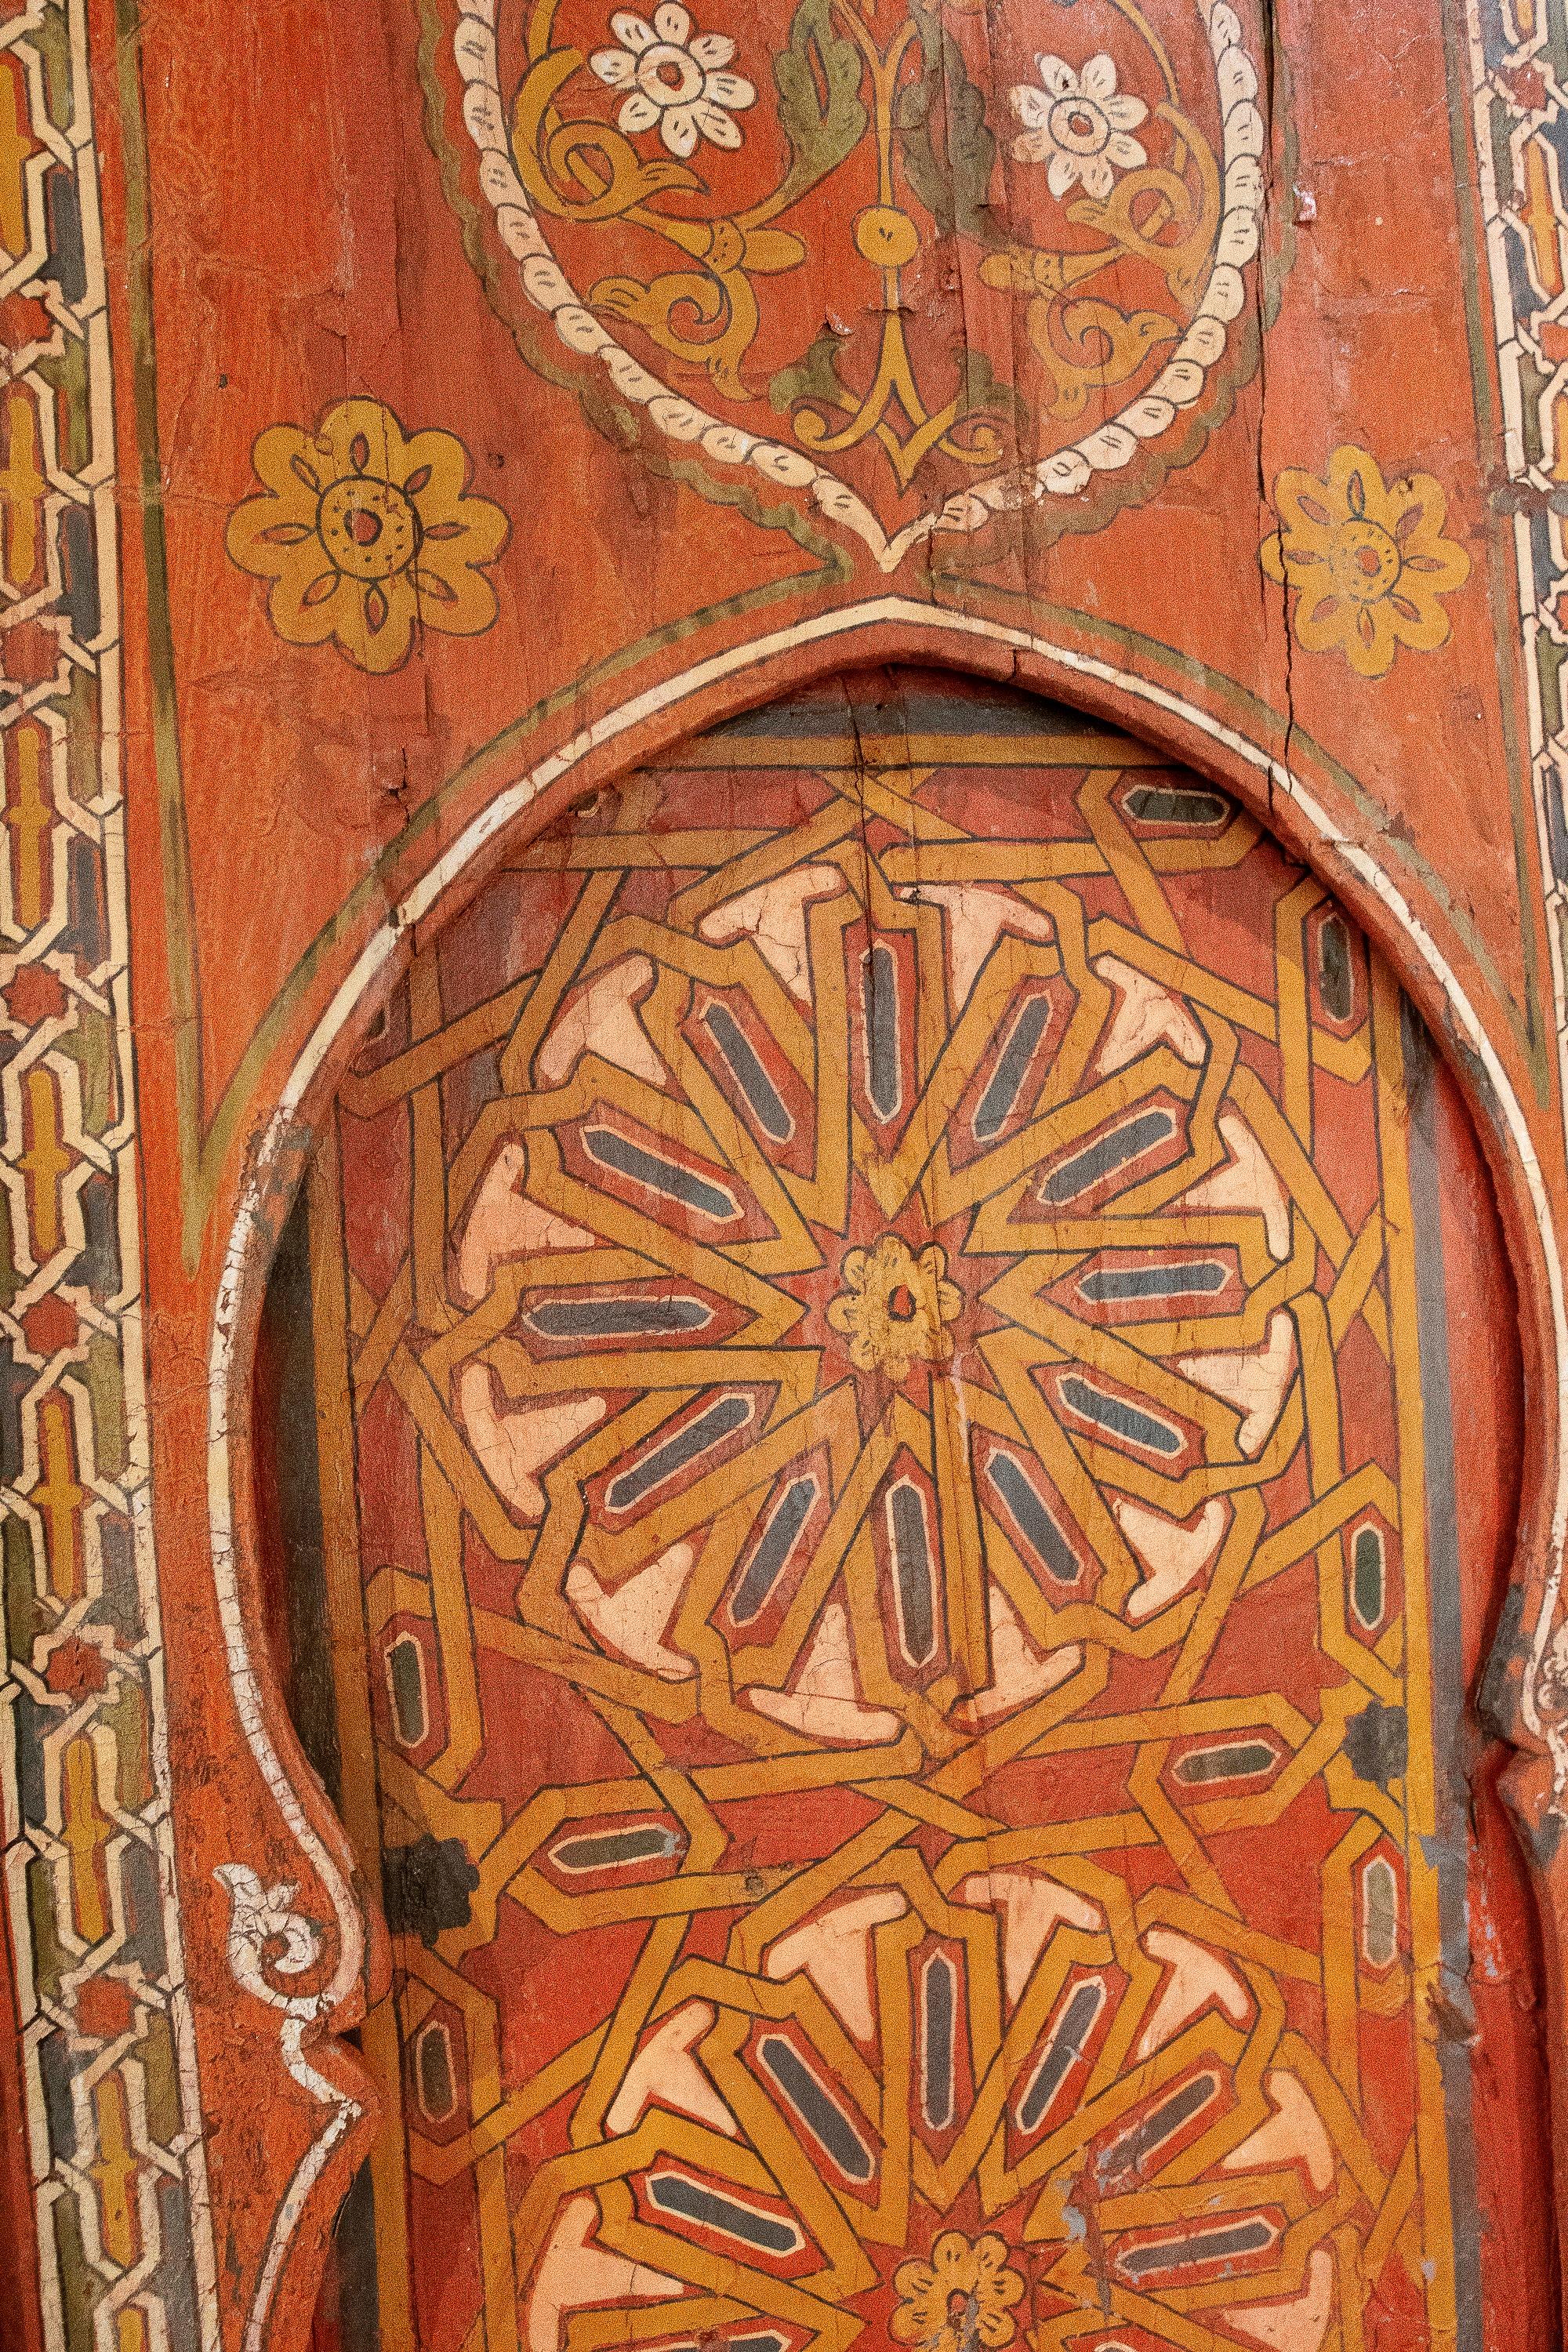 Moroccan Hand-Painted Wooden Door with Flower and Geometric Decoration For Sale 6